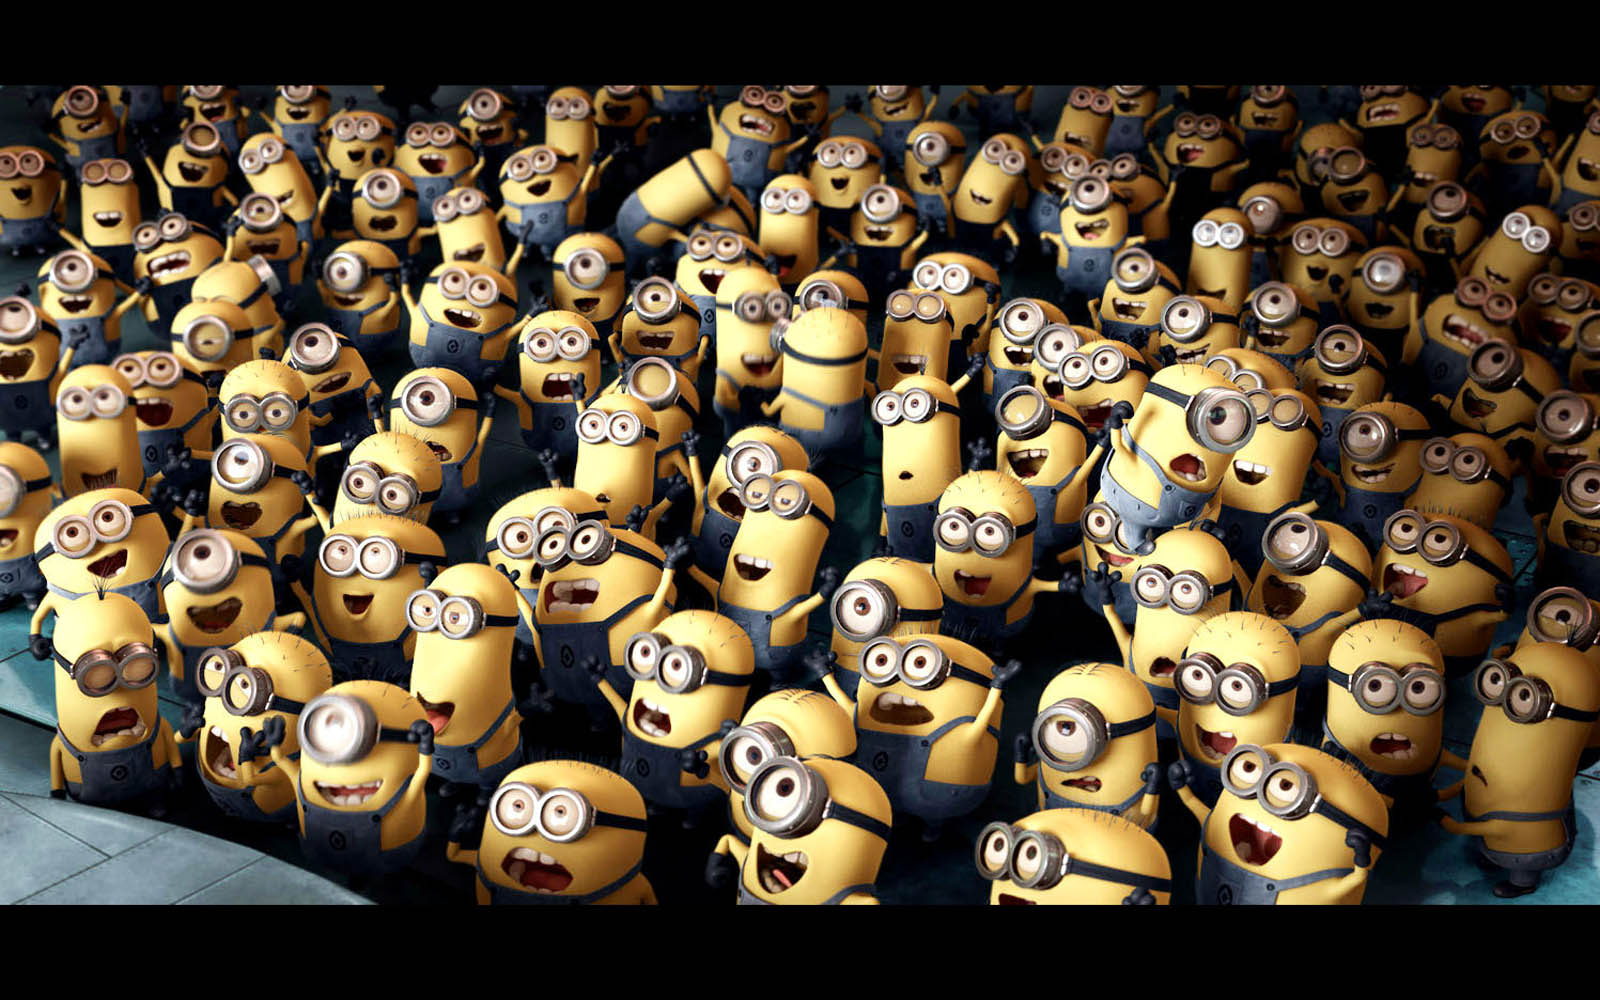 despicable me wallpaper,facial expression,people,smile,crowd,metal